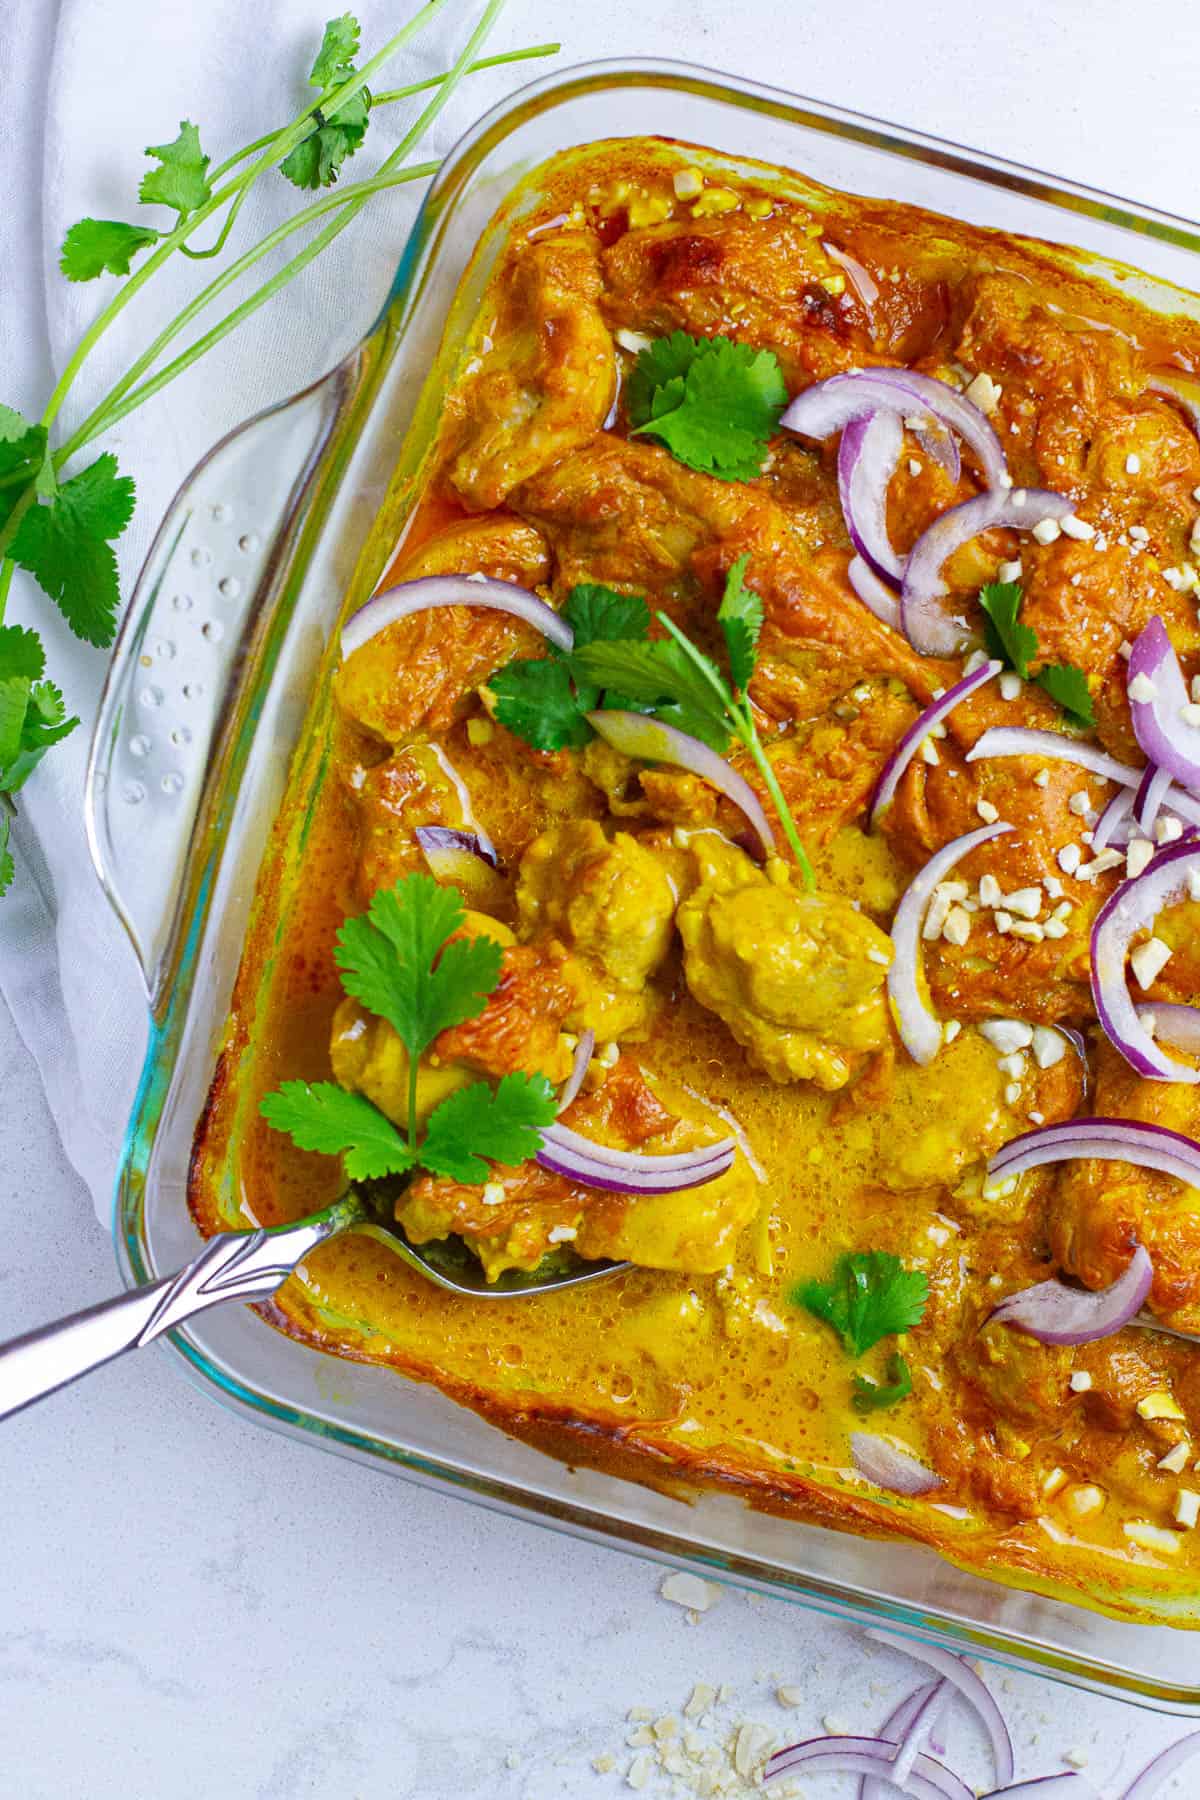 Baked curry chicken being scooped with a serving spoon.